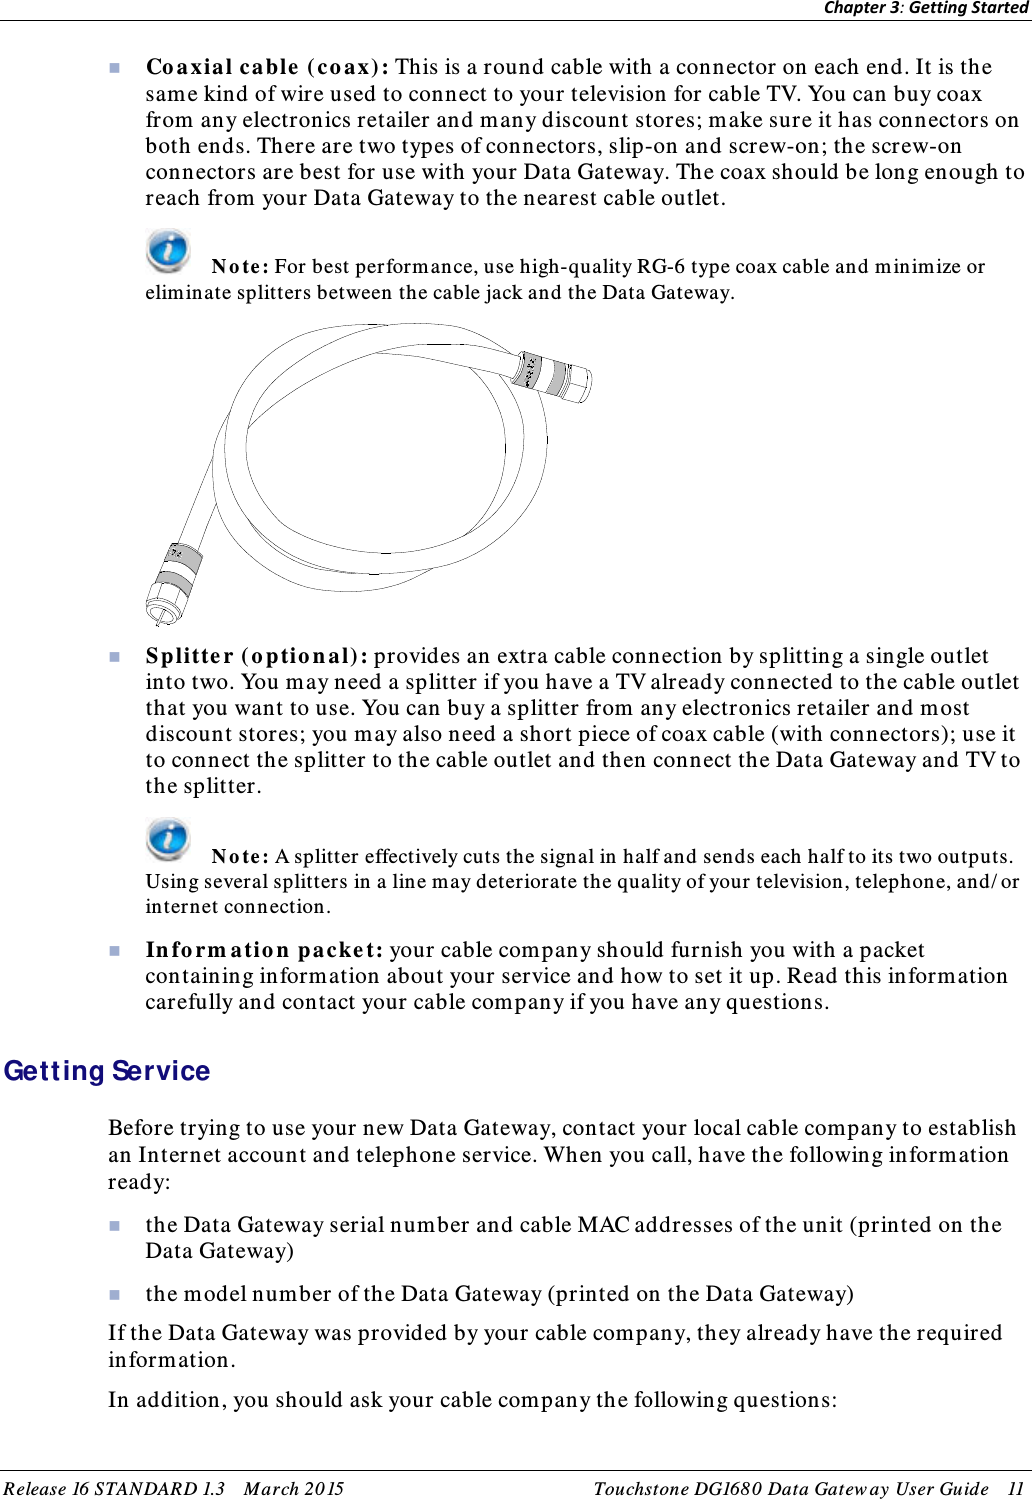 Chapter 3: Getting Started   Co a xial ca ble  ( co ax) : This is a round cable with a connector on each end. It is the same kind of wire used to connect to your television for cable TV. You can buy coax from any electronics retailer and many discount stores; make sure it has connectors on both ends. There are two types of connectors, slip-on and screw-on; the screw-on connectors are best for use with your Data Gateway. The coax should be long enough to reach from your Data Gateway to the nearest cable outlet.  N o te : For best performance, use high-quality RG-6 type coax cable and m inim ize or eliminate splitters between the cable jack and the Data Gateway.   Splitte r ( o ptio n a l): provides an extra cable connection by splitting a single outlet into two. You m ay need a splitter if you have a TV already connected to the cable outlet that you want to use. You can buy a splitter from any electronics retailer and most discount stores; you may also need a short piece of coax cable (with connectors); use it to connect the splitter to the cable outlet and then connect the Data Gateway and TV to the splitter.  N o te : A splitter effectively cuts the signal in half and sends each half to its two outputs. Using several splitters in a line may deteriorate the quality of your television, telephone, and/ or internet con nection.  In fo rm atio n  packe t: your cable com pany should furnish you with a packet containing inform ation about your service and how to set it up. Read this inform ation carefully and contact your cable com pany if you have any questions.   Getting Service Before trying to use your new Data Gateway, contact your local cable company to establish an Internet account and telephone service. When you call, have the following inform ation ready:  the Data Gateway serial number and cable MAC addresses of the unit (printed on the Data Gateway)  the model number of the Data Gateway (printed on the Data Gateway) If the Data Gateway was provided by your cable com pany, they already have the required information. In addition, you should ask your cable com pany the following questions: Release 16 STAN DARD 1.3    March 2015 Touchstone DG168 0  Data Gatew ay  User Guid e    11  